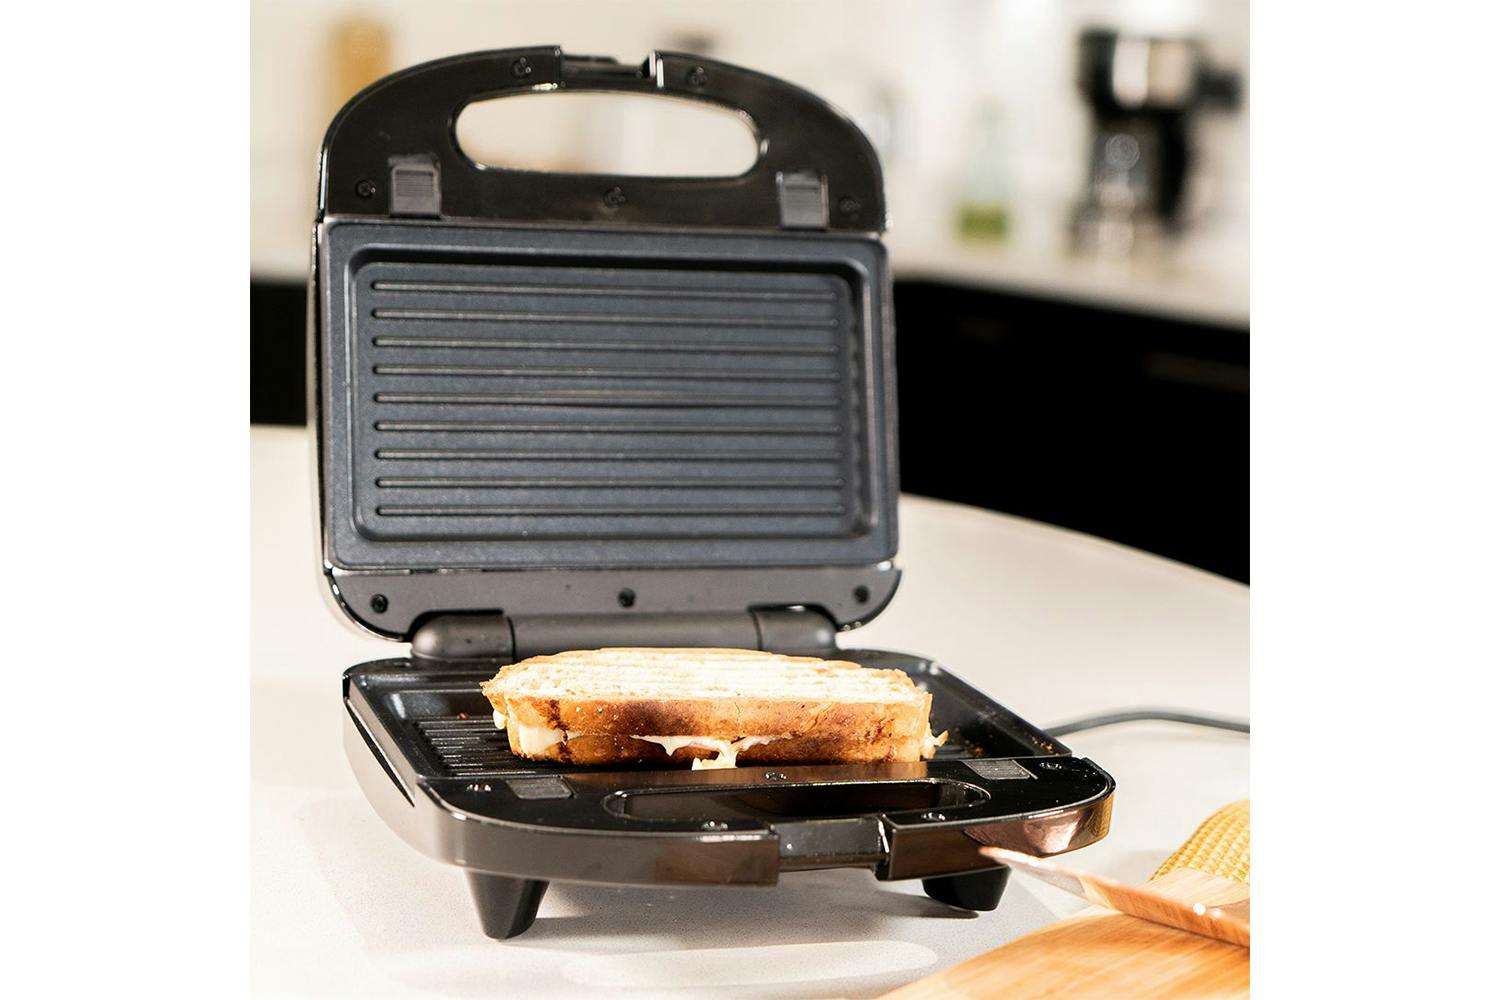 Dash Mini Maker Portable Grill Machine + Panini Press for Gourmet Burgers,  Sandwiches, Chicken + Other On the Go Breakfast, Lunch, or Snacks with